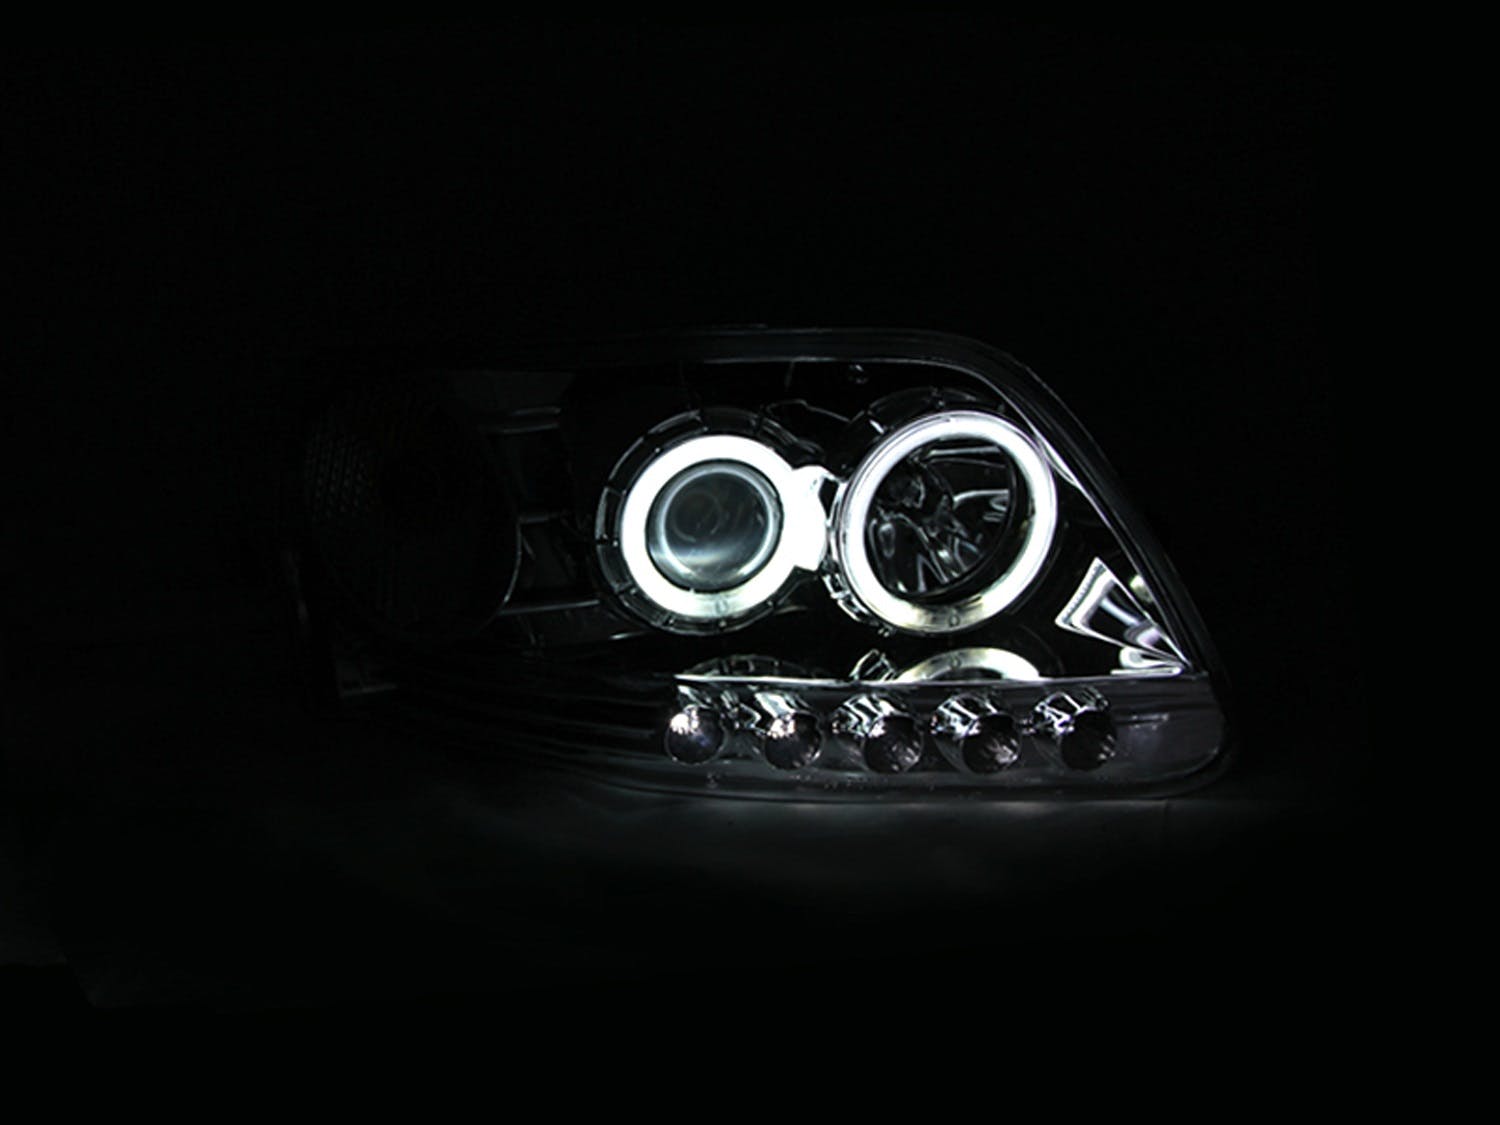 AnzoUSA 111054 Projector Headlights with Halo Chrome 1pc